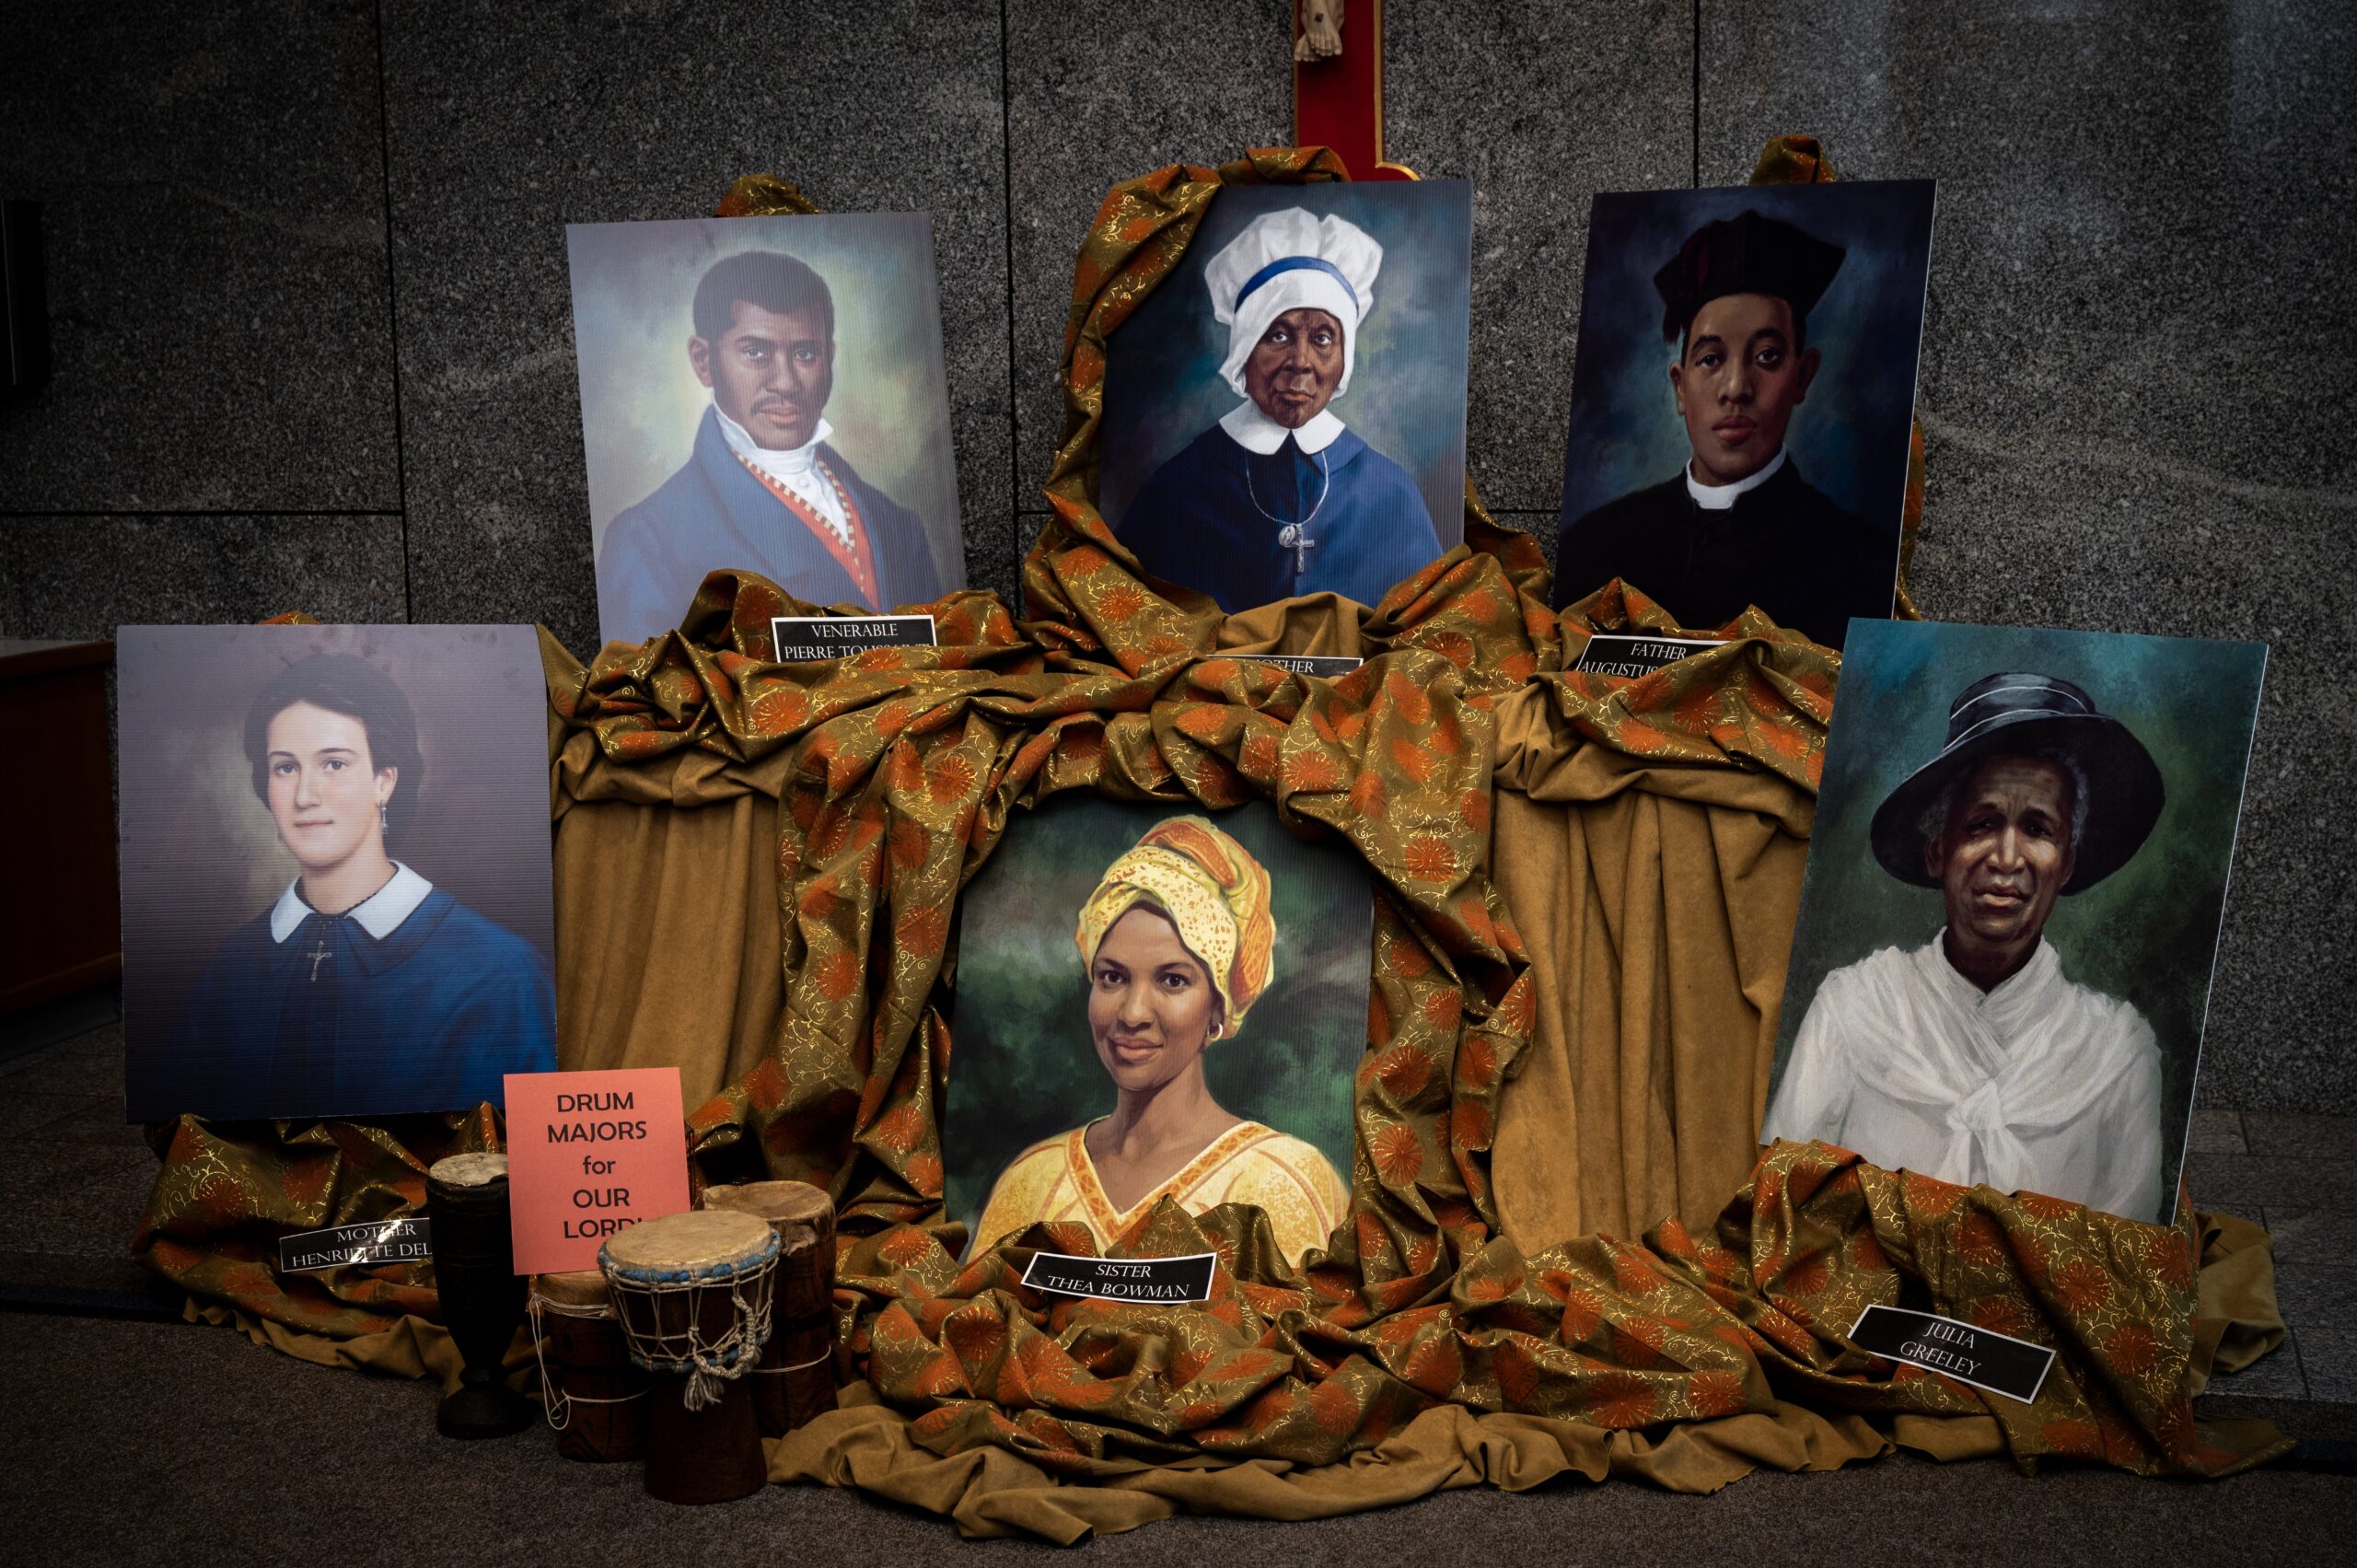 Portraits of six African Americans who are sainthood candidates are displayed in the lobby of the Catholic Center in Baltimore in November 2023 for Black Catholic History Month. The six are: (from left top row) Pierre Toussaint, a noted philanthropist; Mother Mary Lange, founder of the Baltimore-based Oblate Sisters of Providence; and Father Augustus Tolton, the first Catholic priest in the U.S. known publicly to be Black. From left bottom row are Mother Henriette Delille, founder of the New Orleans-based Sisters of the Holy Family; Sister Thea Bowman, the first African American to become a member of the Franciscan Sisters of Perpetual Adoration; and Julia Greeley, known as the city of Denver's "Angel of Charity." (OSV News/Kevin J. Parks, Catholic Review)